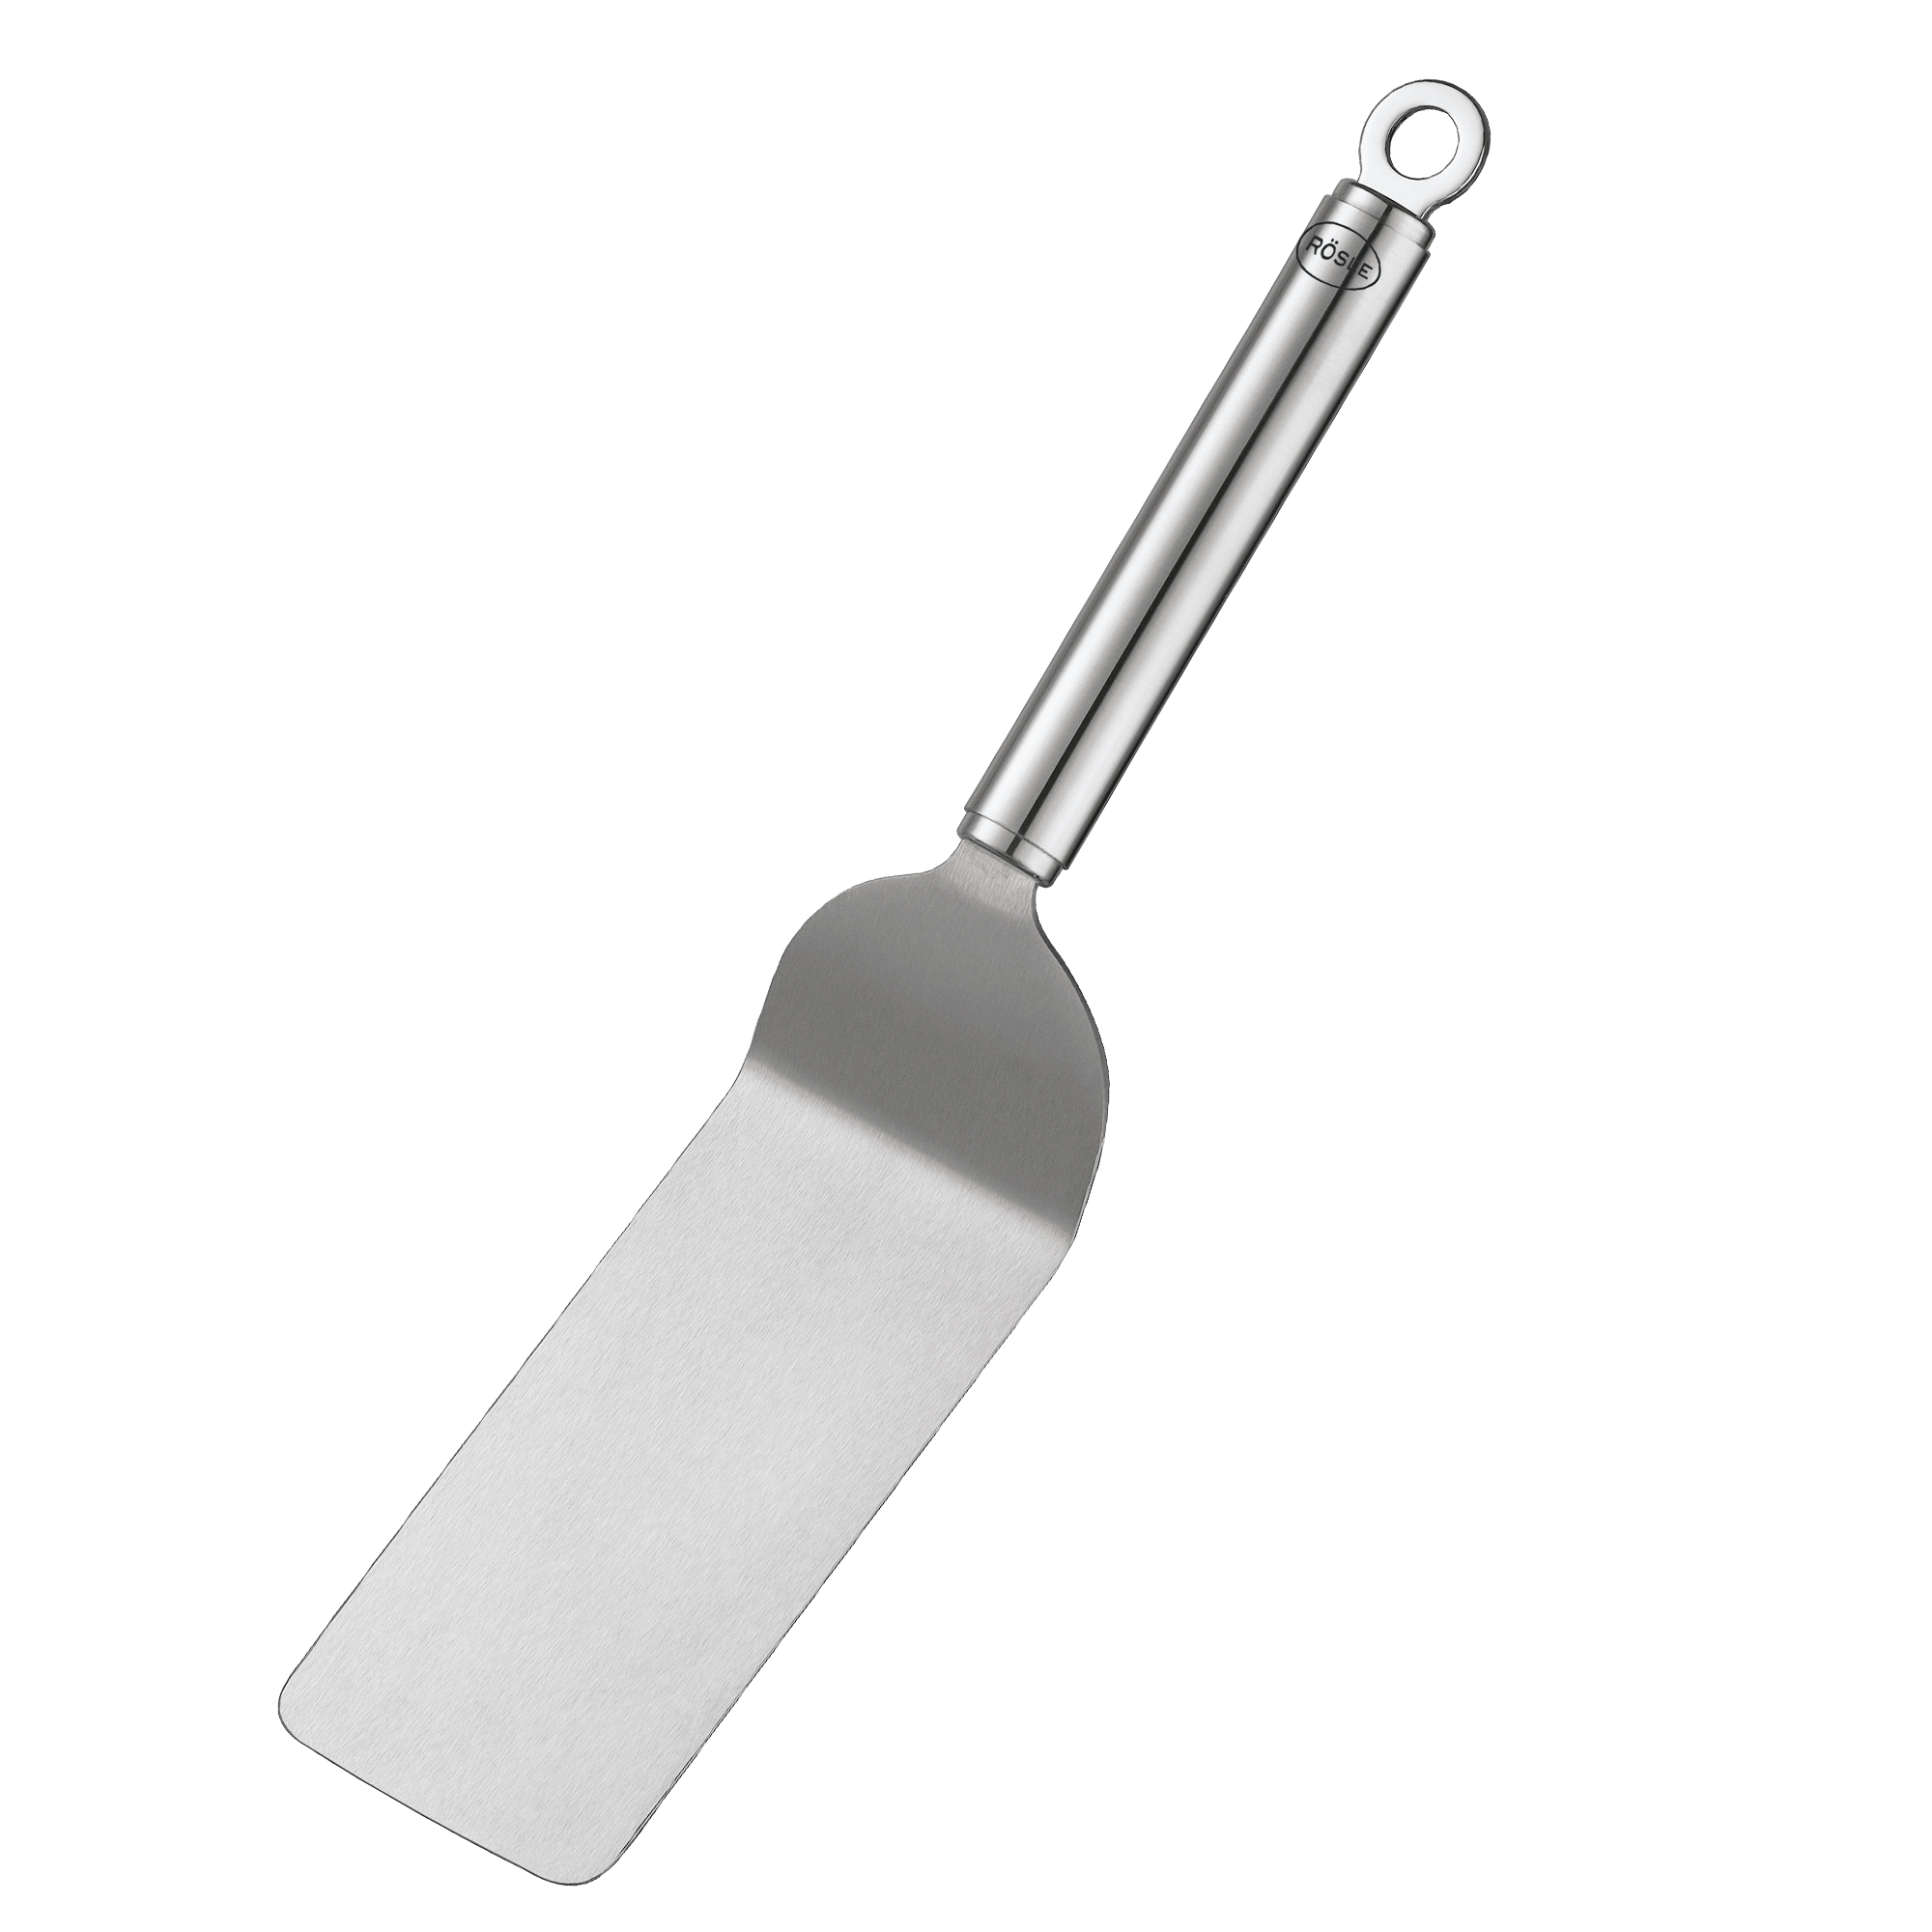 Buy Angled Spatula 32 cm|12.6 in. online at RÖSLE GmbH  Co. KG